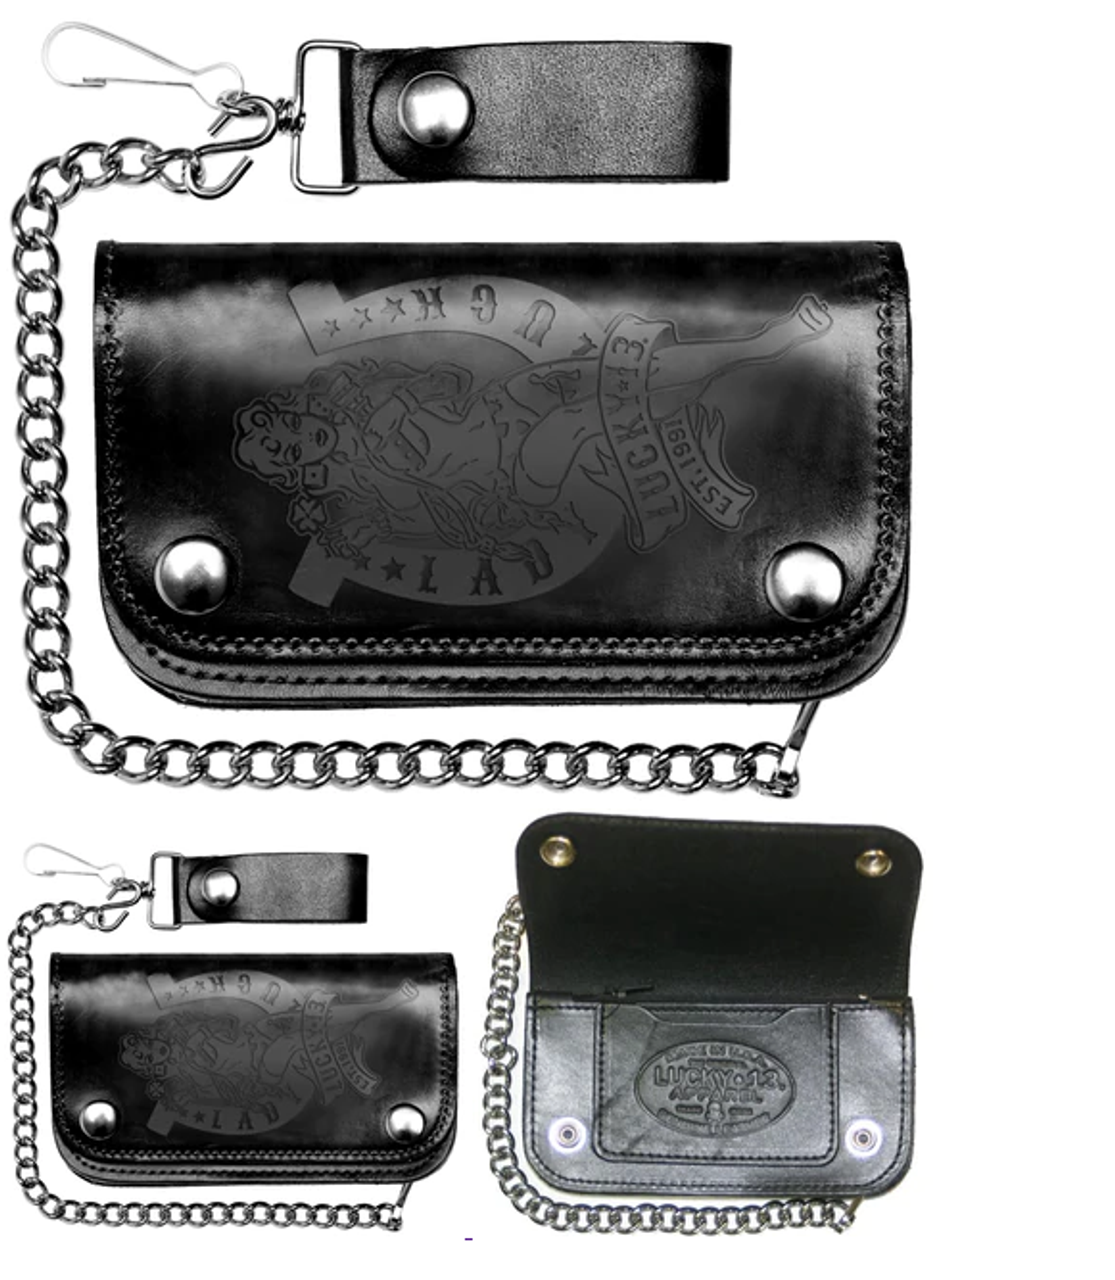 Lucky 13 Lady Luck Embossed Biker Car Chain Wallet